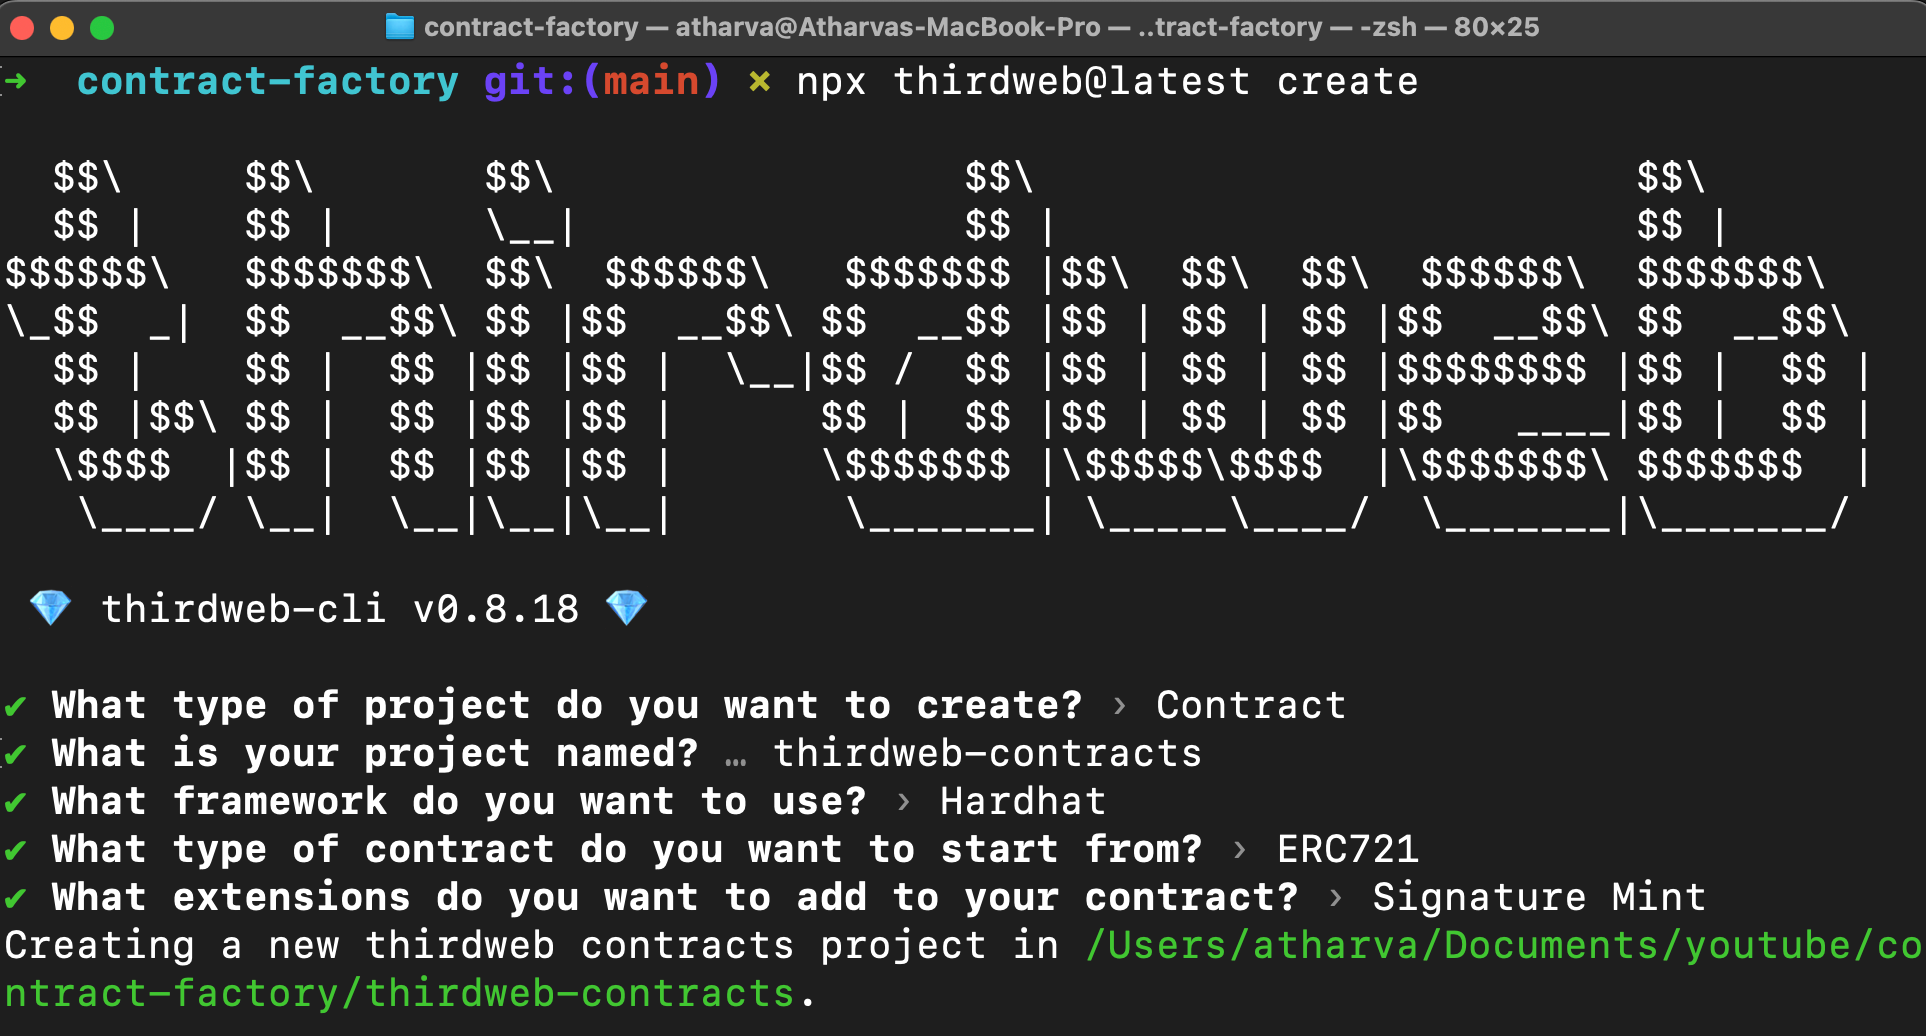 Creating a contract using thirdweb CLI